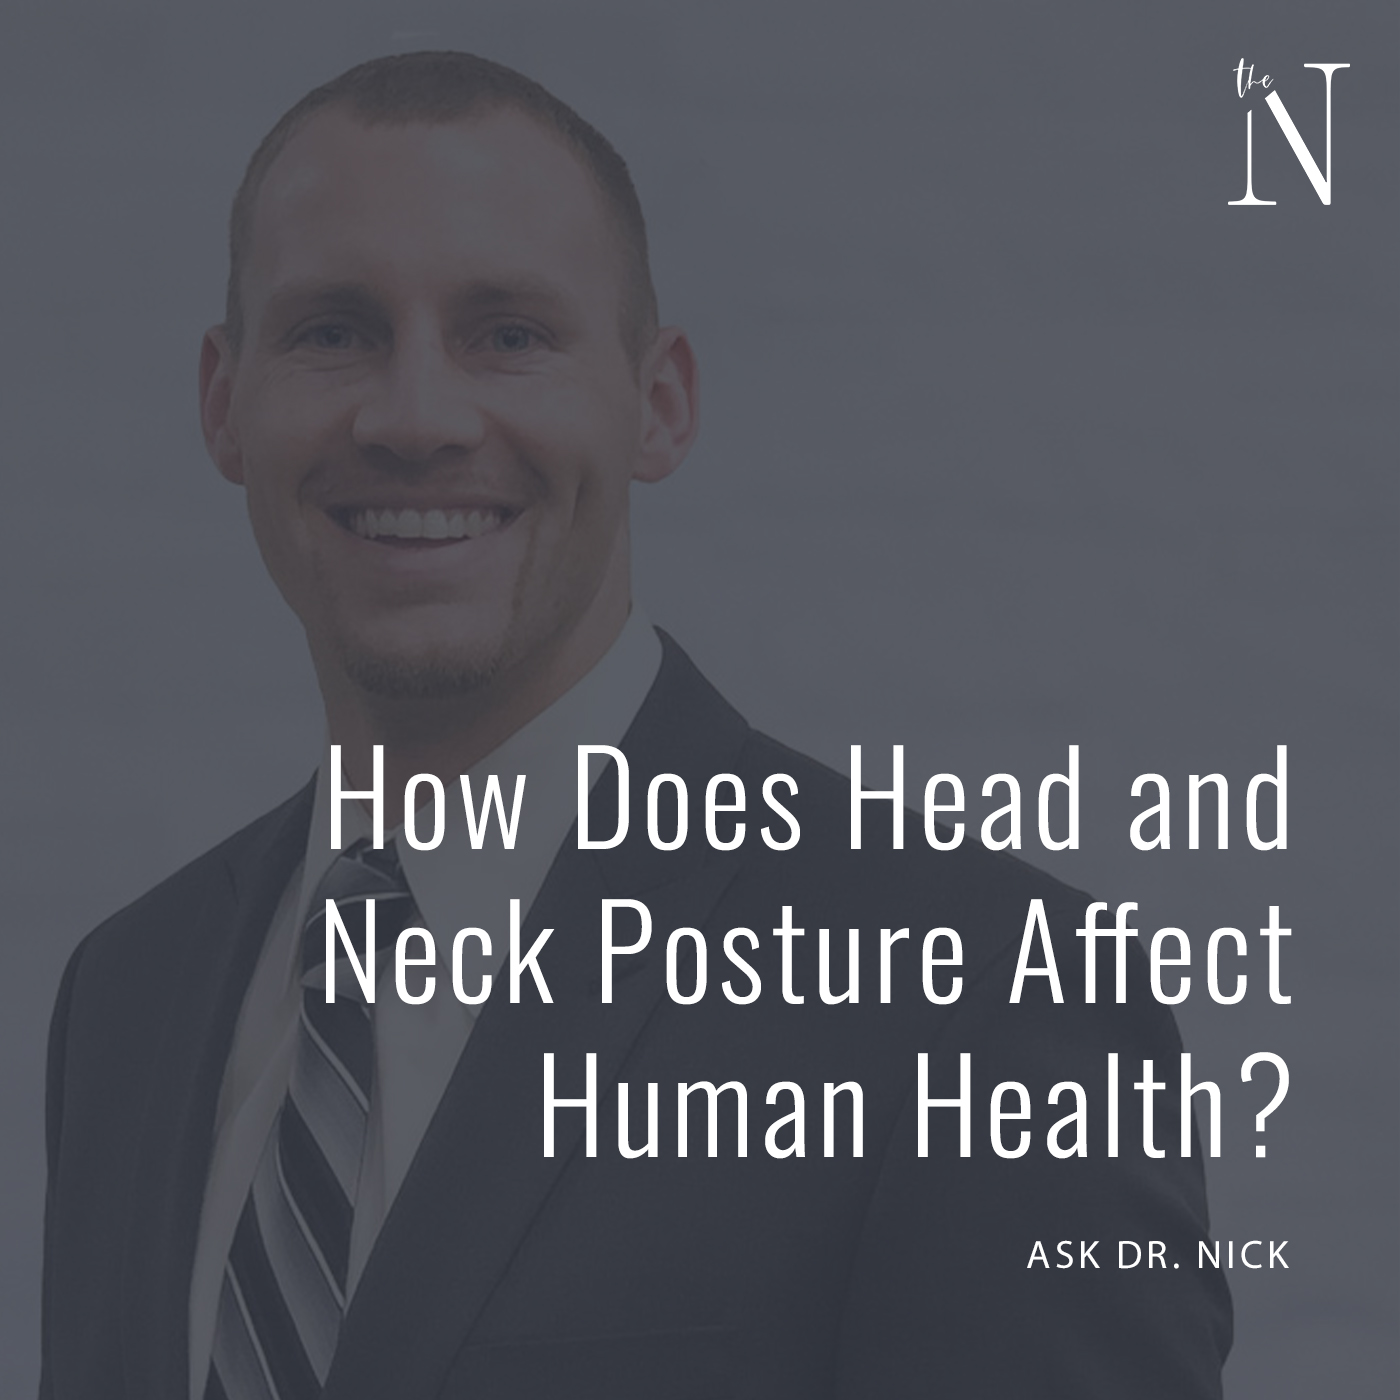 How Does Head and Neck Posture Affect Human Health